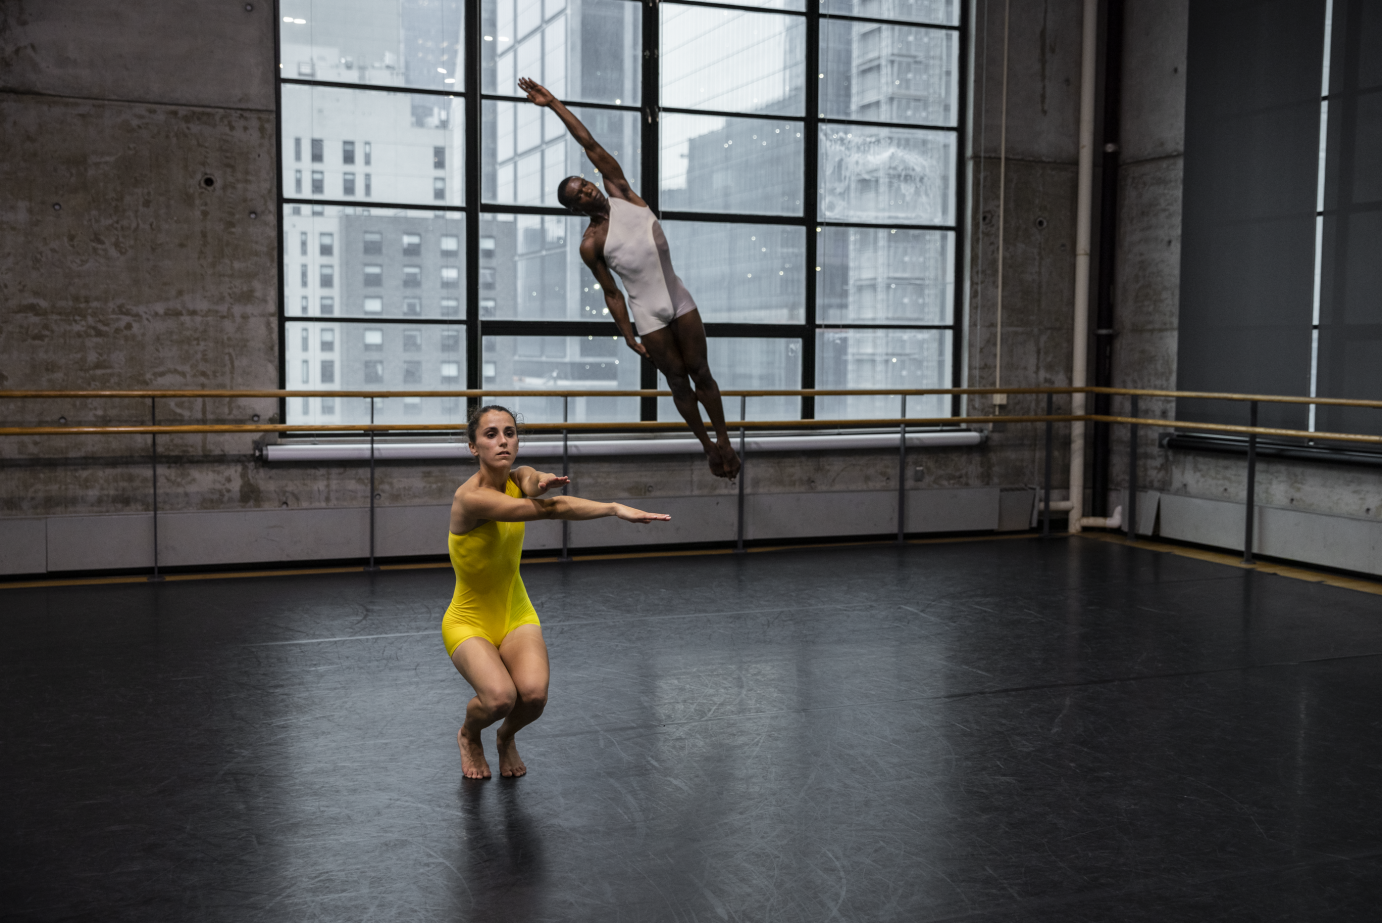 Downstage, Mariah Anton, dressed in a yellow shorty-tard, squats with her legs together, her arms extended forward in an X. Behind her, Cemiyon Barber leaps high into the air, his body a diagonal line with one arm extended over his head.